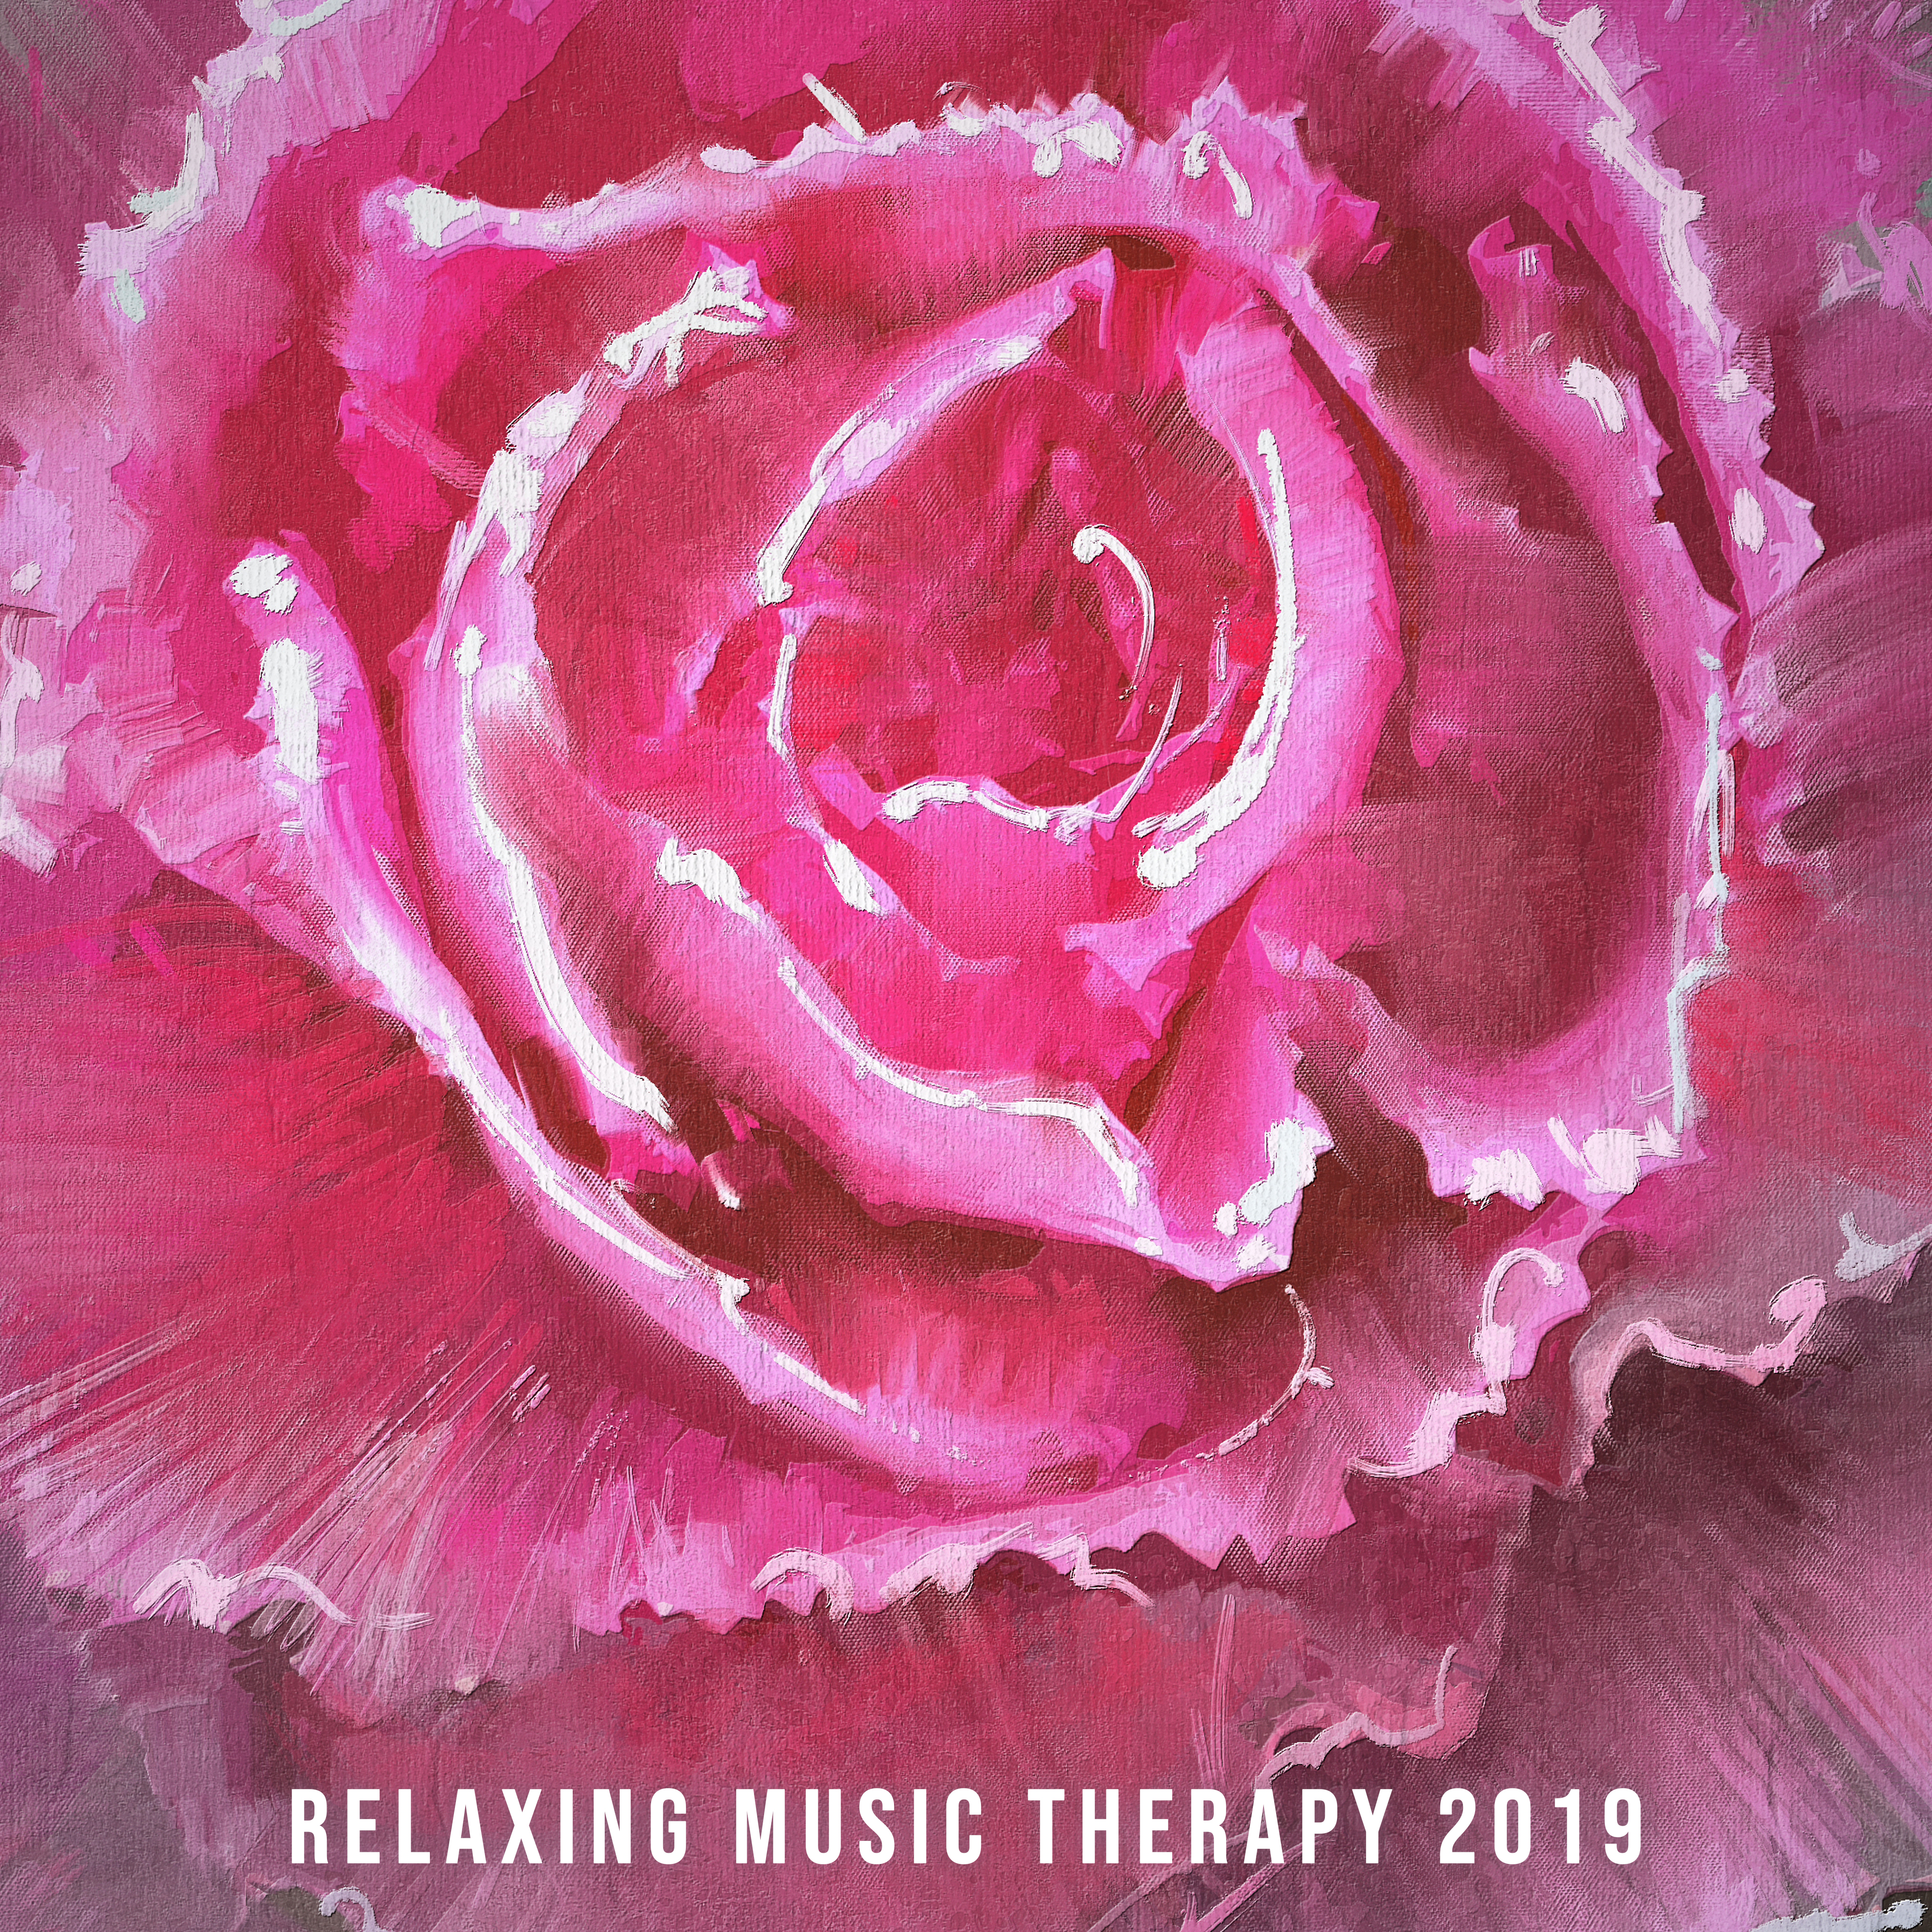 Relaxing Music Therapy 2019  Calming Songs for Spa, Relaxation, Wellness, Massage Music, Stress Relief, Pure Relaxation, Spa Songs